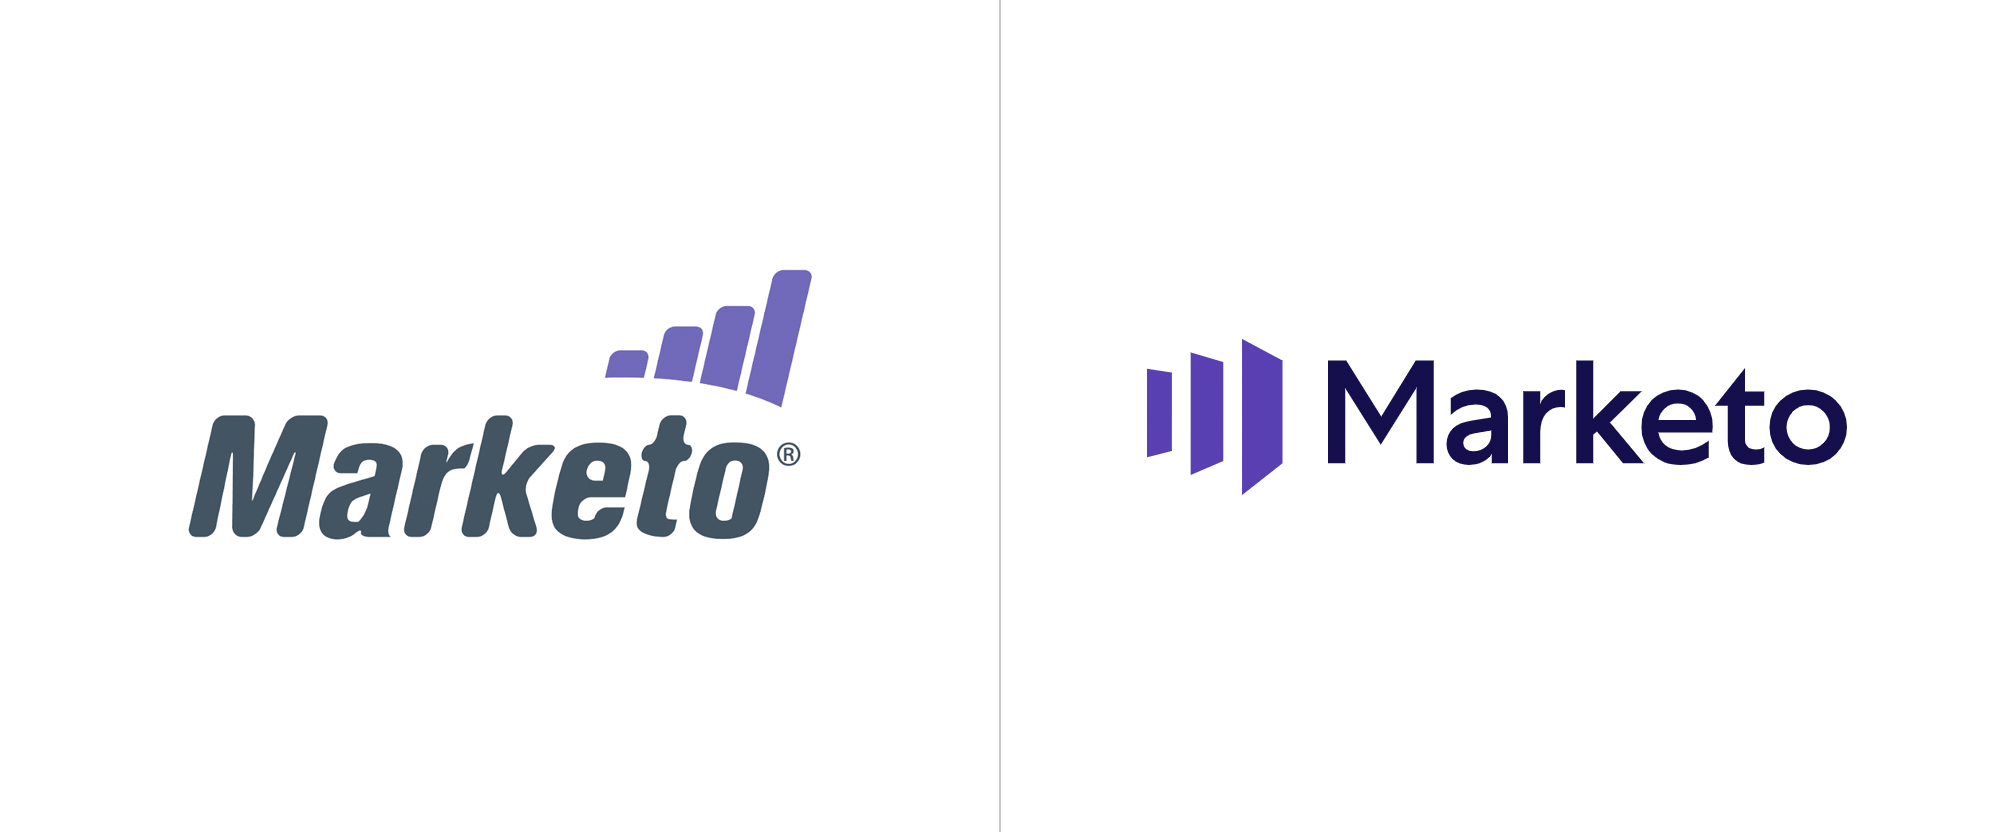 Follow Logo - Brand New: Follow Up: New Logo And Identity For Marketo By Focus Lab